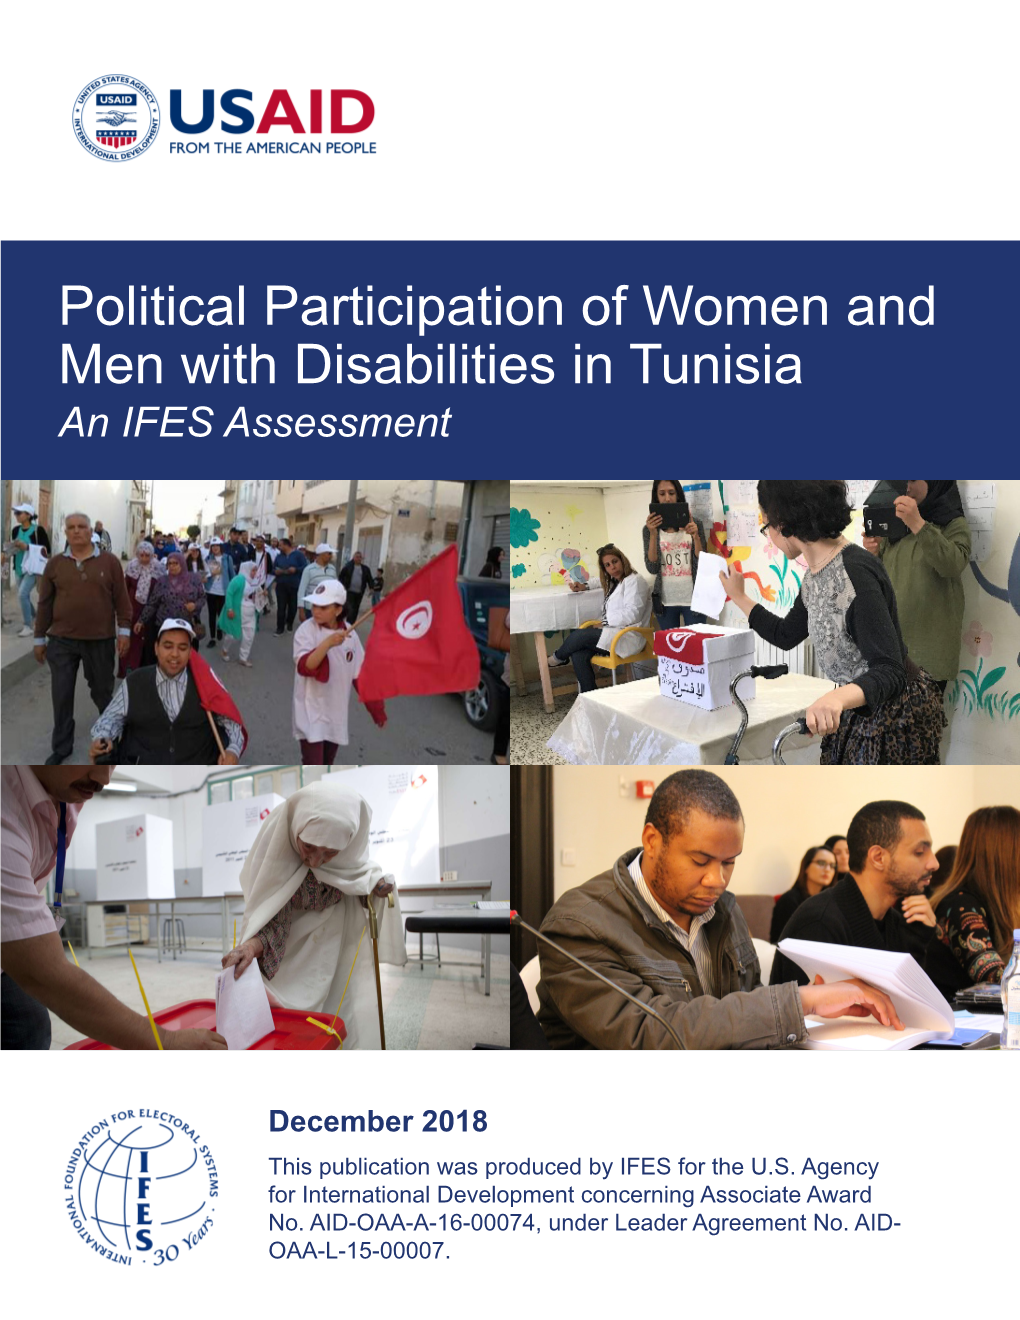 Political Participation of Women and Men with Disabilities in Tunisia an IFES Assessment